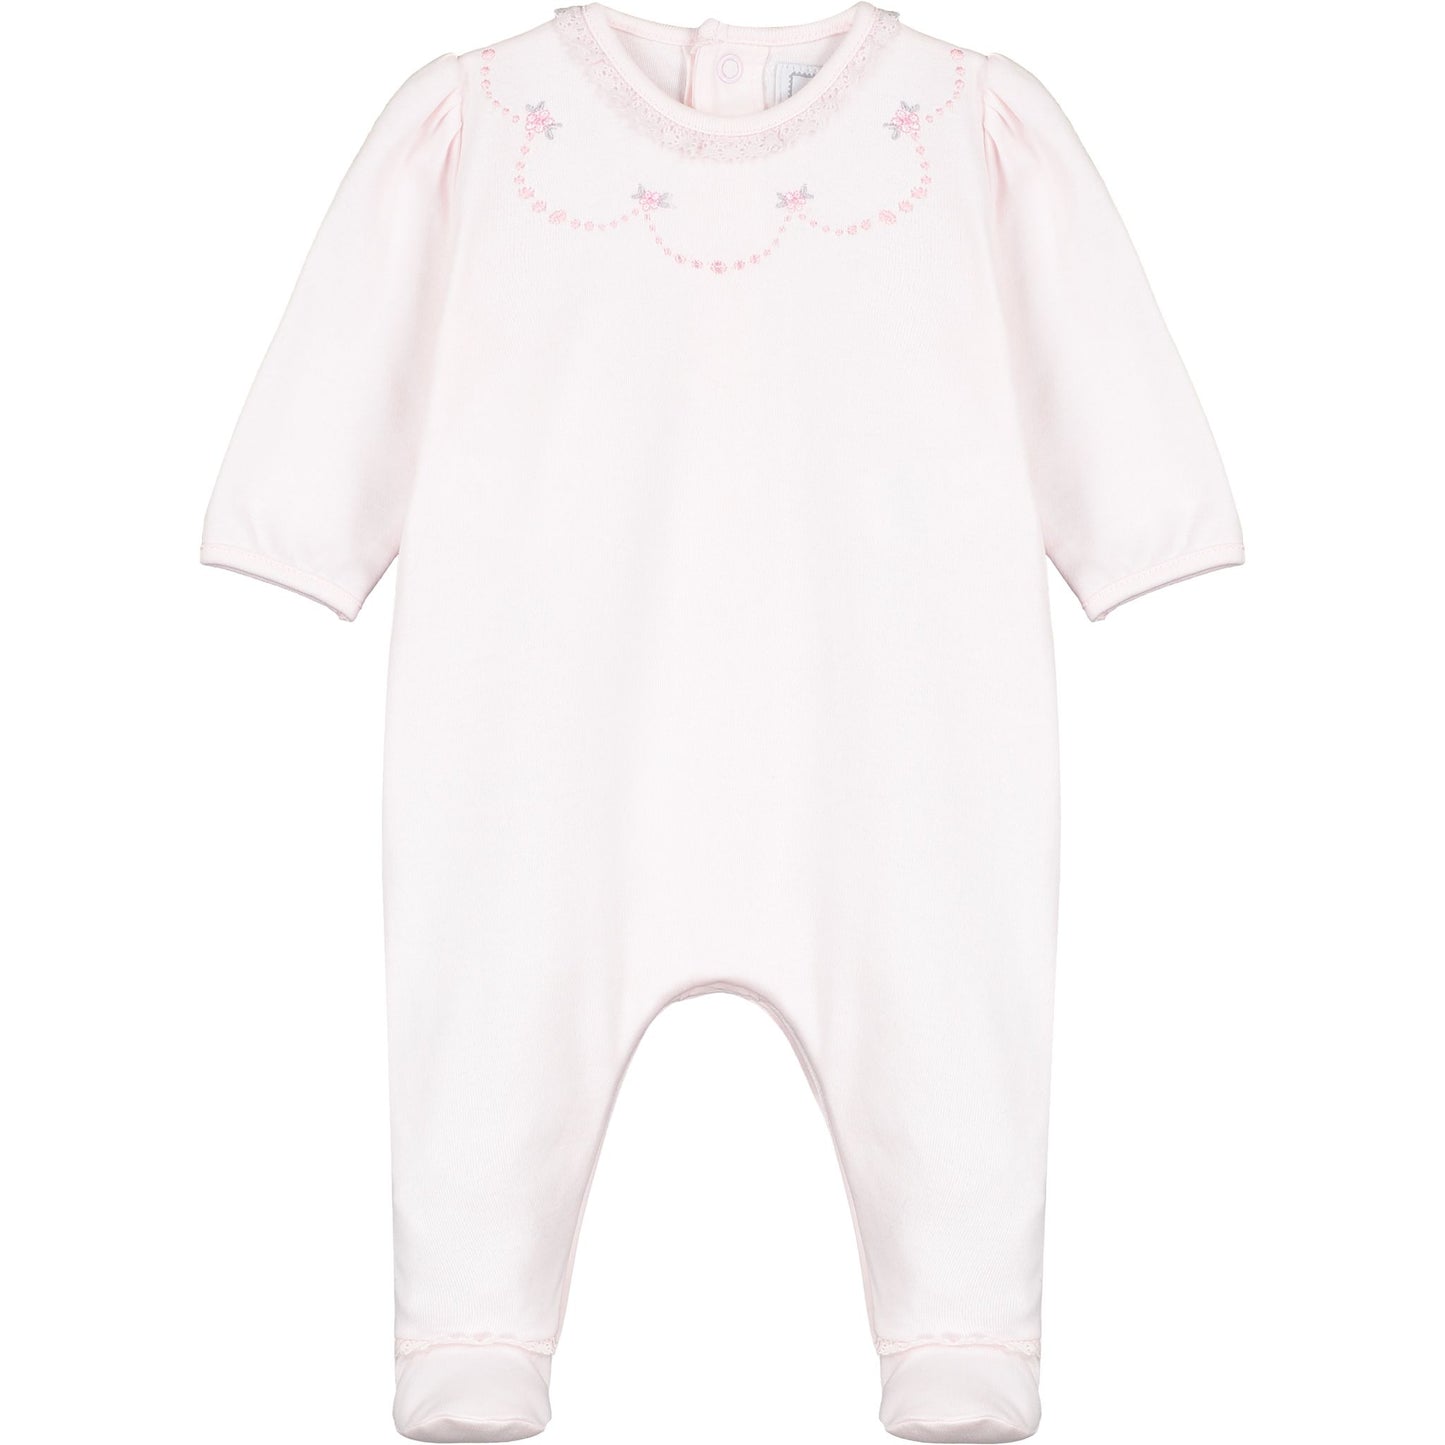 Emile et Rose Baby Girl's Pale Pink Embroidered Babygrow & Hat